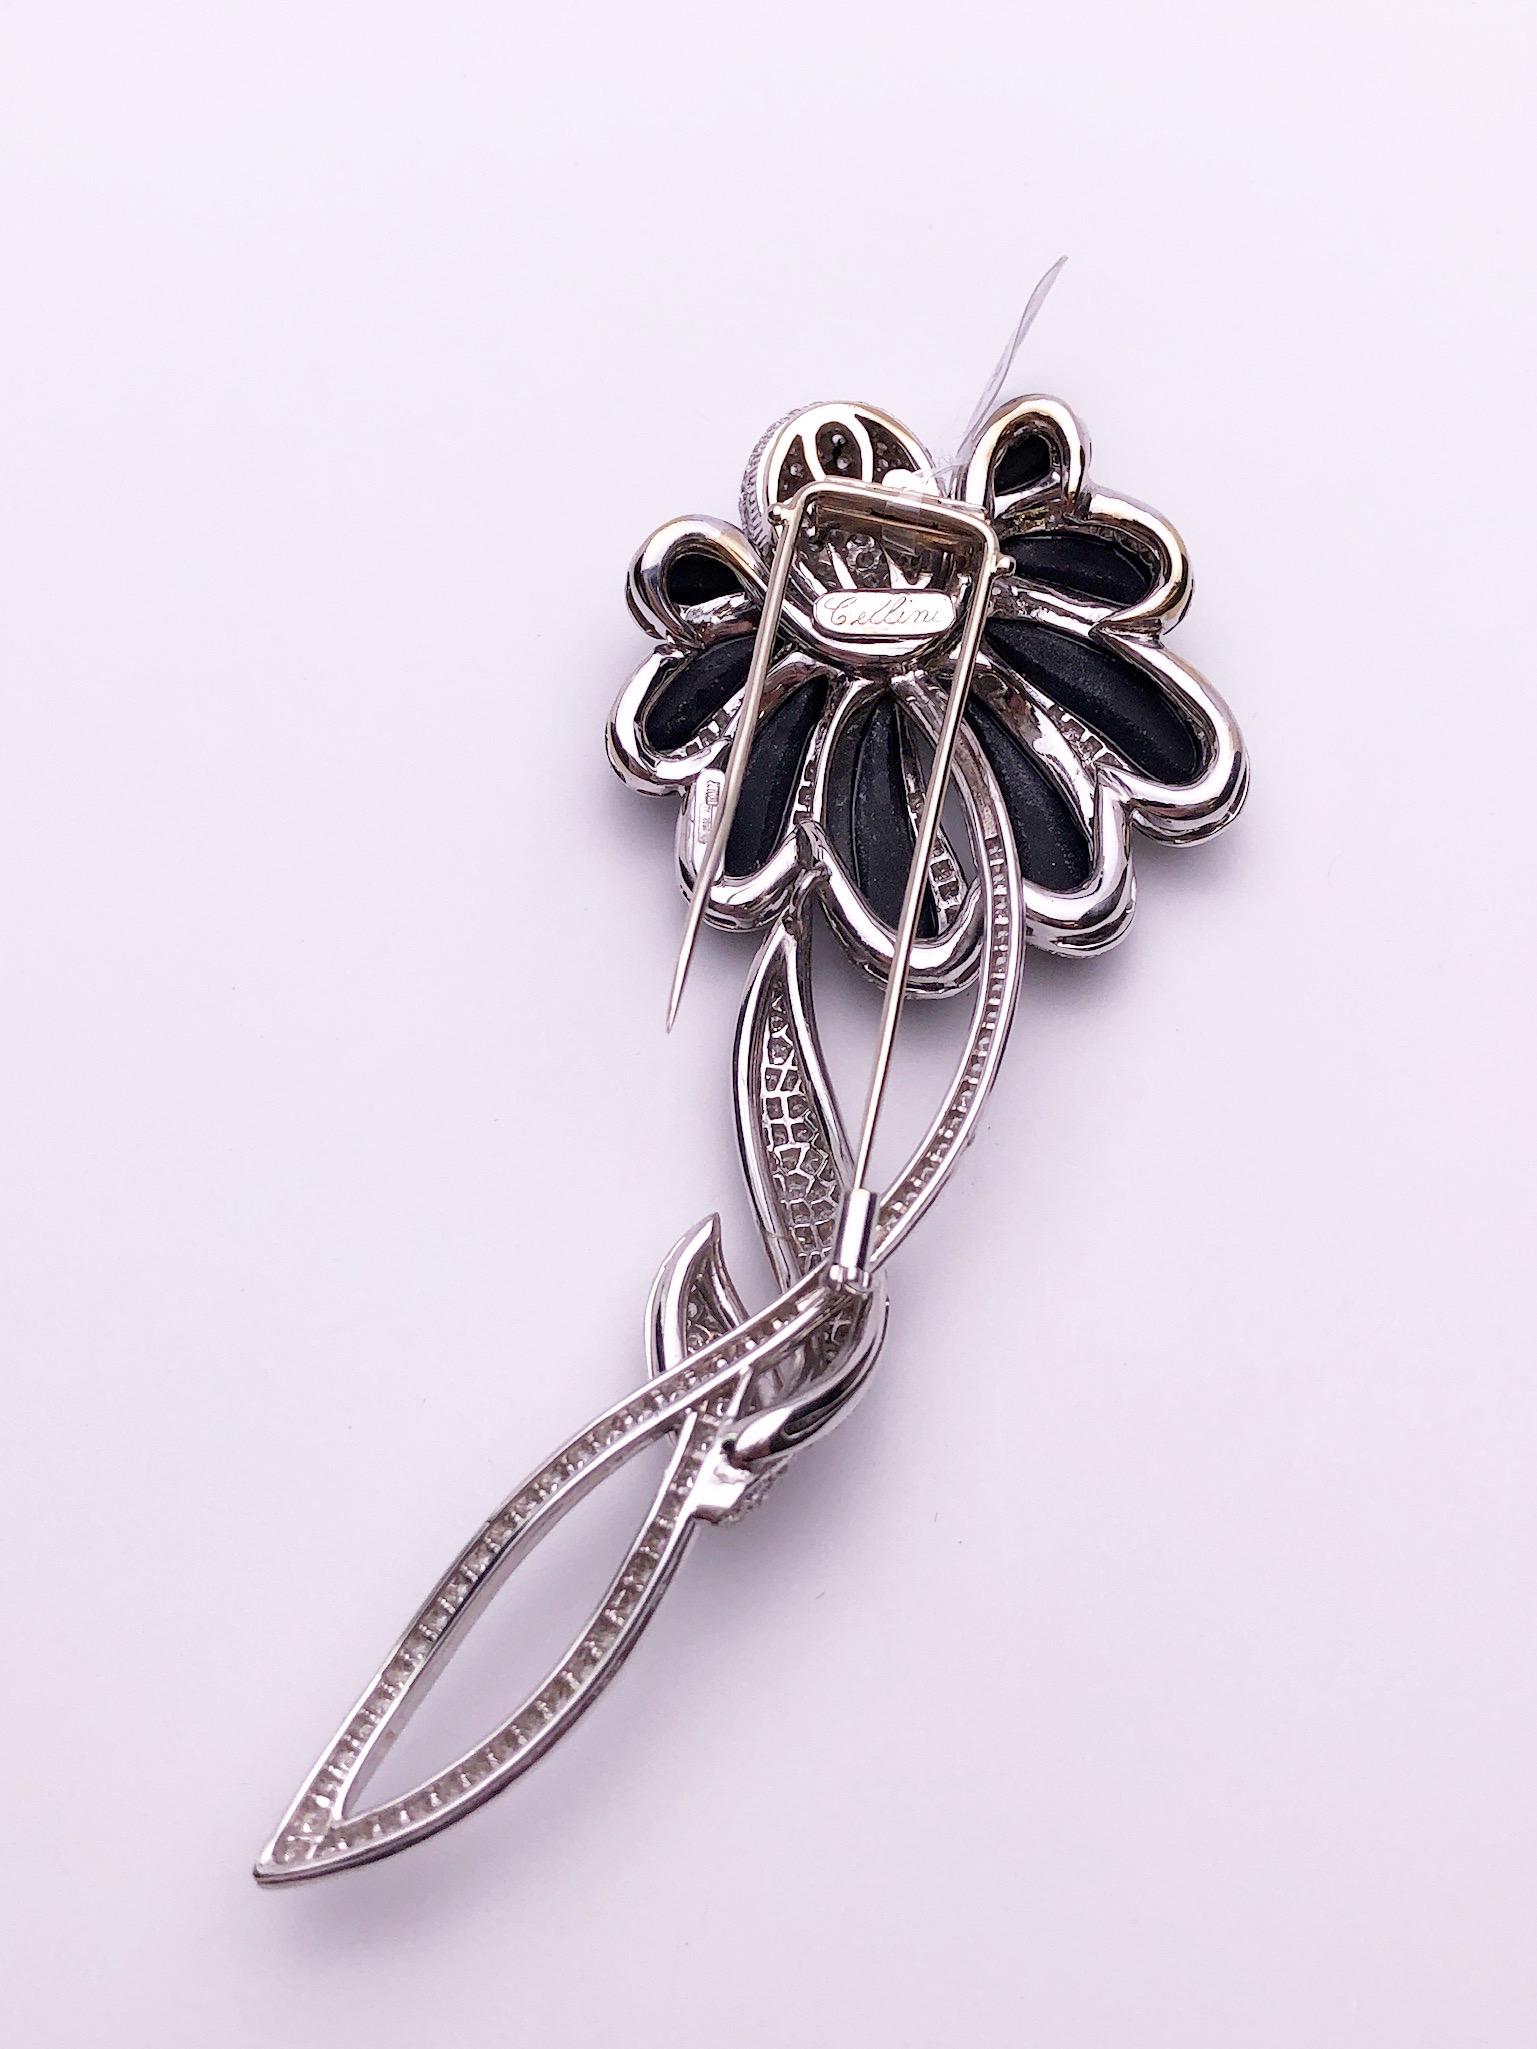 Contemporary Cellini 18 Karat White Gold, 5.50 Carat Diamond and Onyx Flower Brooch For Sale